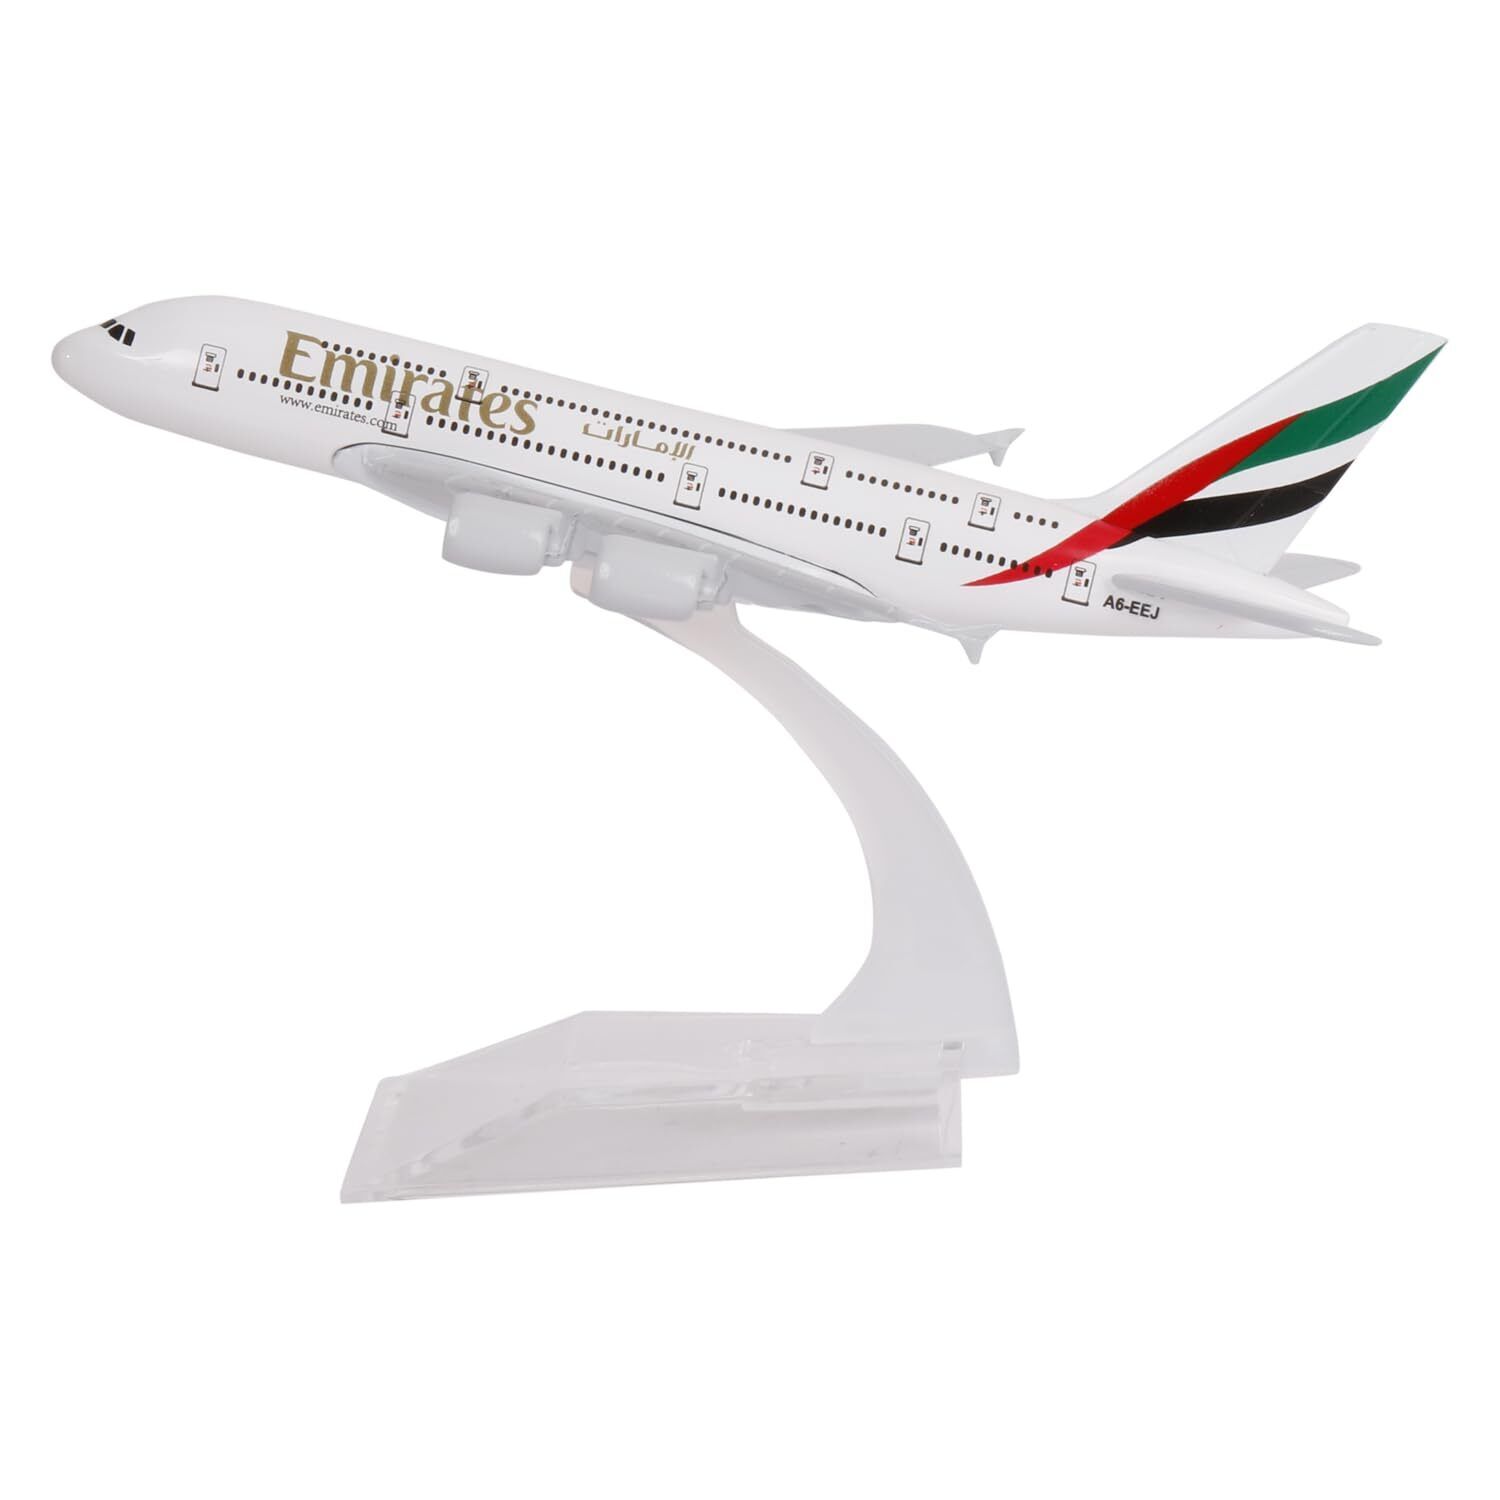 Fly Emirates Airways Airlines Scale Model Metal Aircraft Aeroplane Replica 16 CM